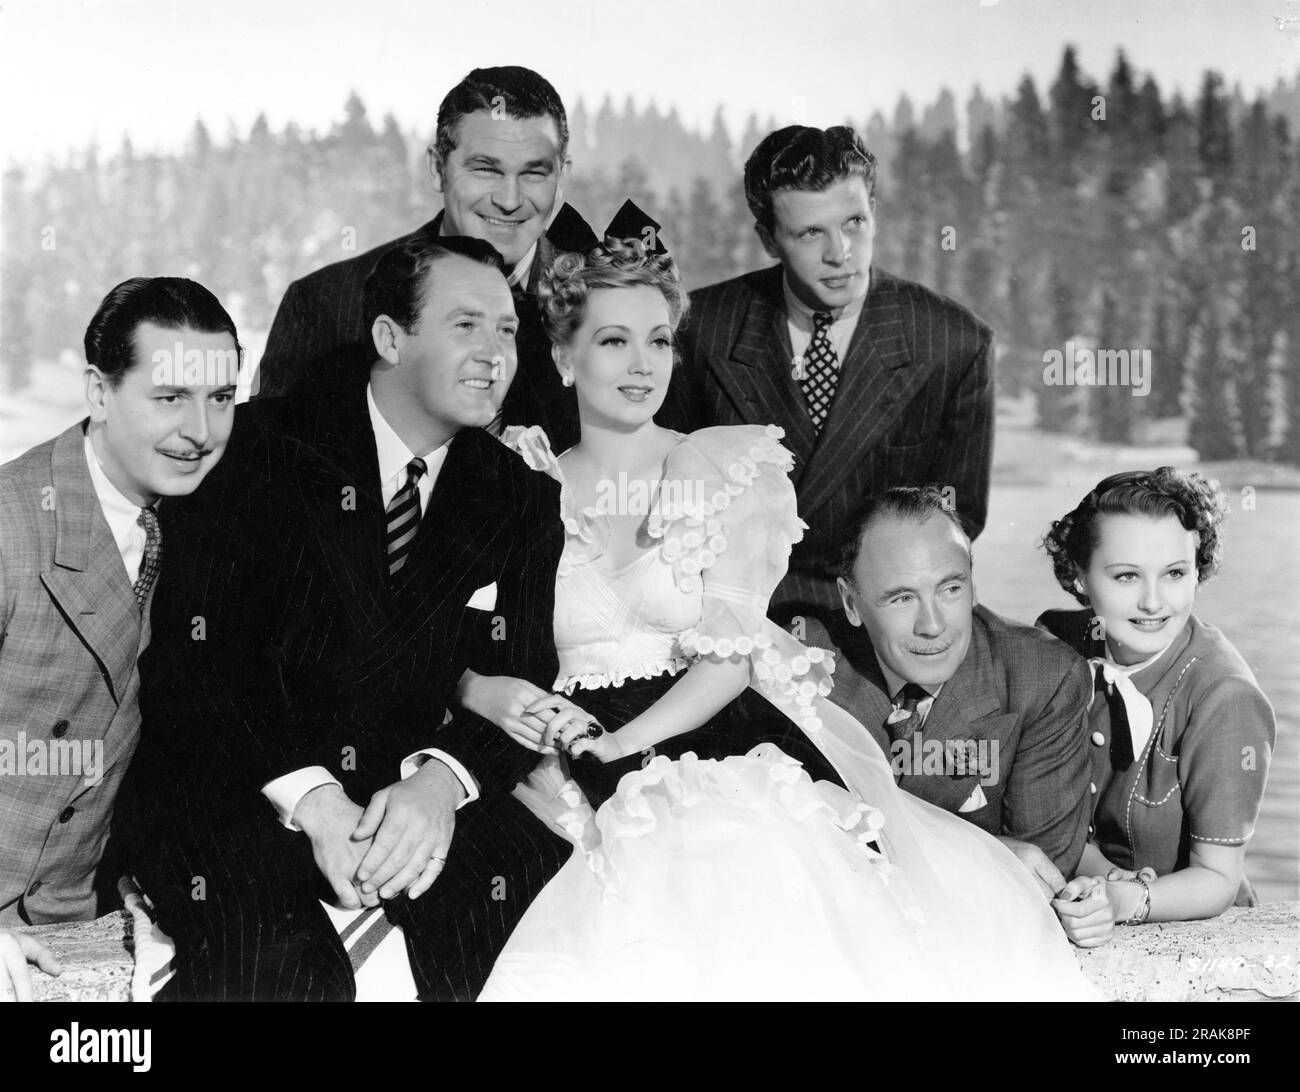 REGINALD GARDINER IAN HUNTER GUINN 'BIG BOY' WILLIAMS ANN SOTHERN DAN DAILEY ROLAND YOUNG and LYNNE CARVER in DULCY 1940 director S. SYLVAN SIMON based on the play by George S. Kaufman and Marc Connelly gowns Gilbert Adrian producer Edgar Selwyn Metro Goldwyn Mayer (MGM) Stock Photo